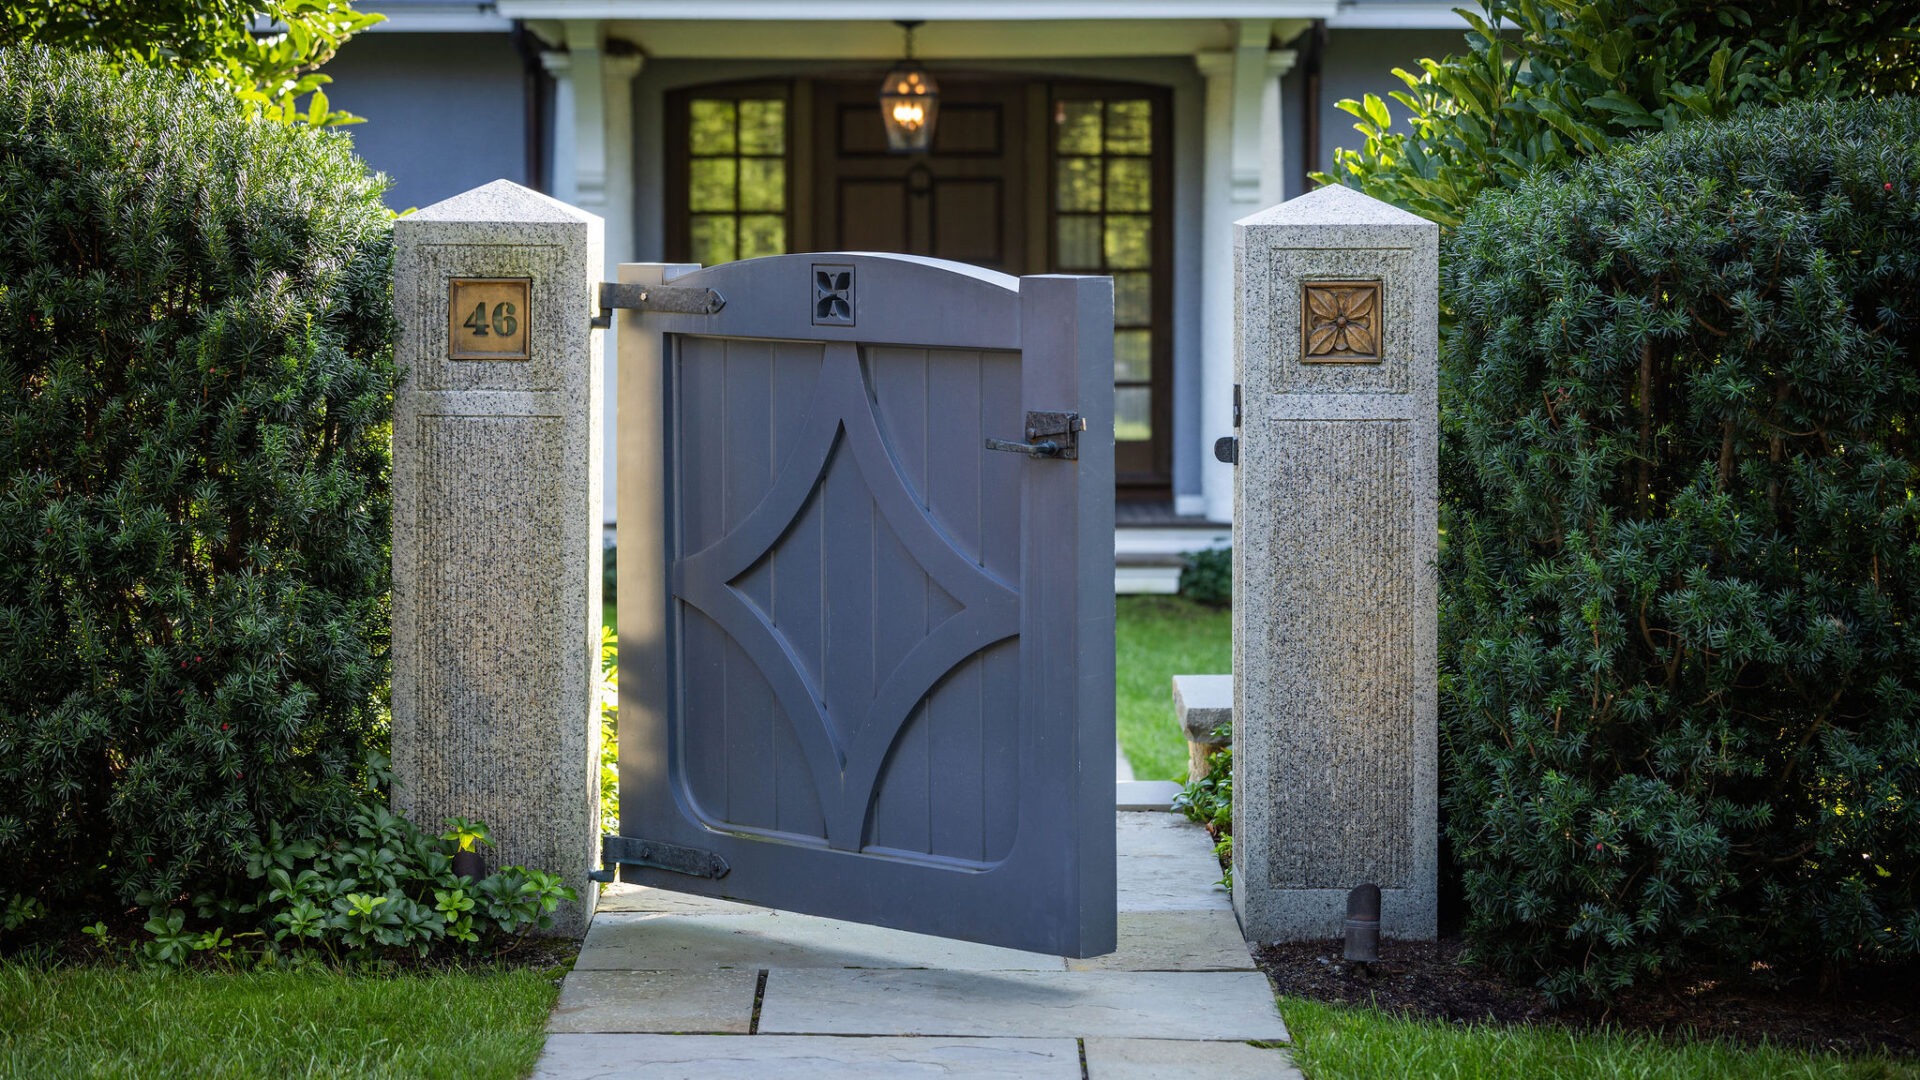 An elegant grey wooden gate with ornate patterns stands open between two stone pillars marked with the number '46', leading to a residential entrance.